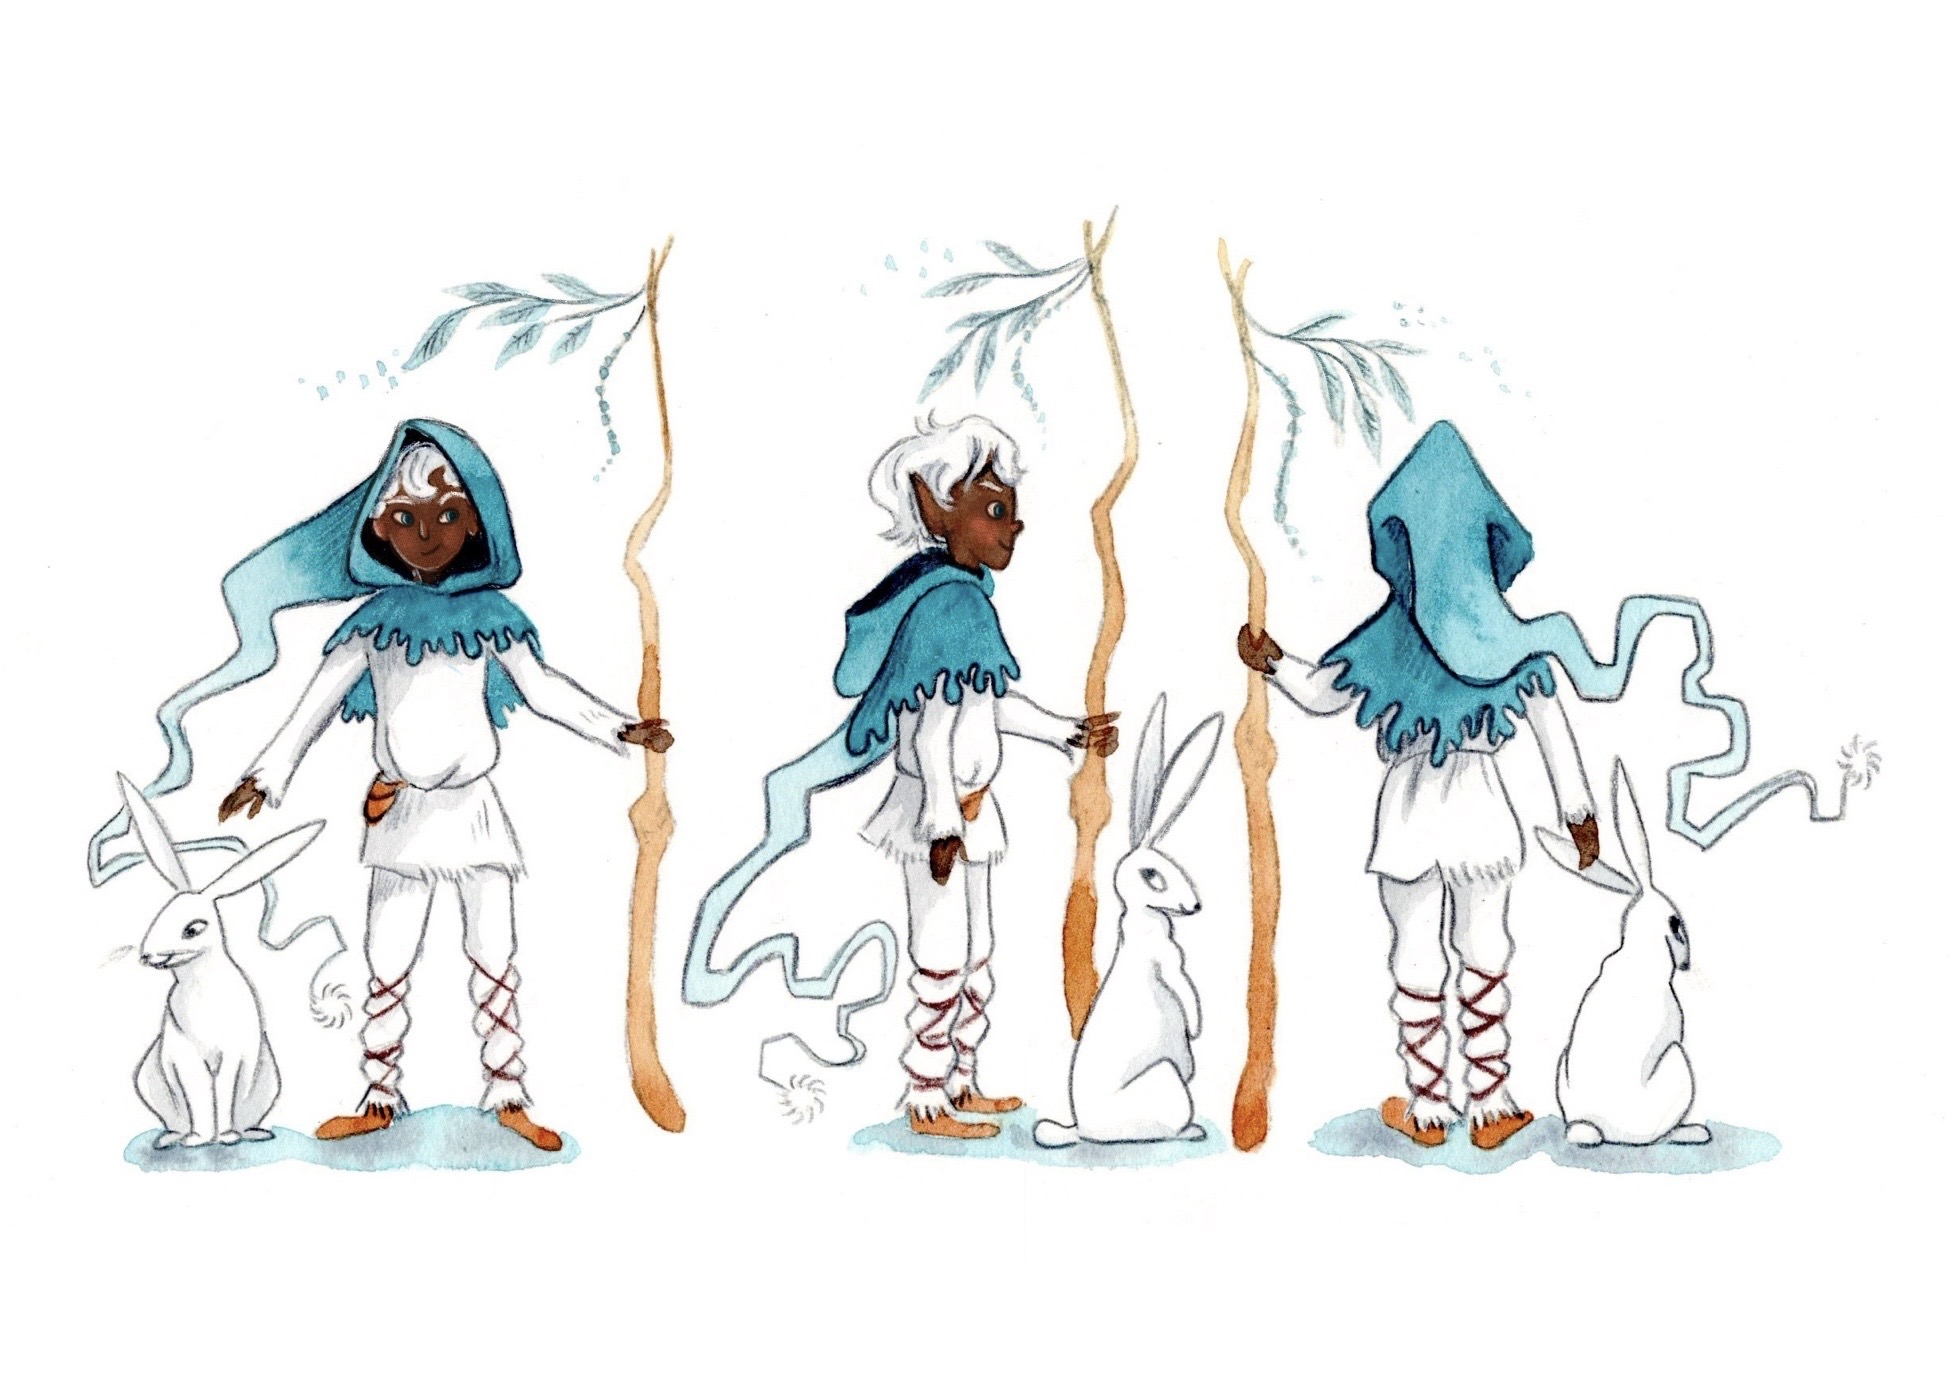 Character design sheet showing a Jack front character from front, side, and back. Jack is dressed in white tunic and leggings, bound around his legs with brown straps. He wears a blue good with a very long flowing tassel on the end of the hood that flows all the way to his ankles. In his hand he holds a staff with beads and blue feathers at the top of it. A white rabbit sits on the ground beside him in each of the poses.